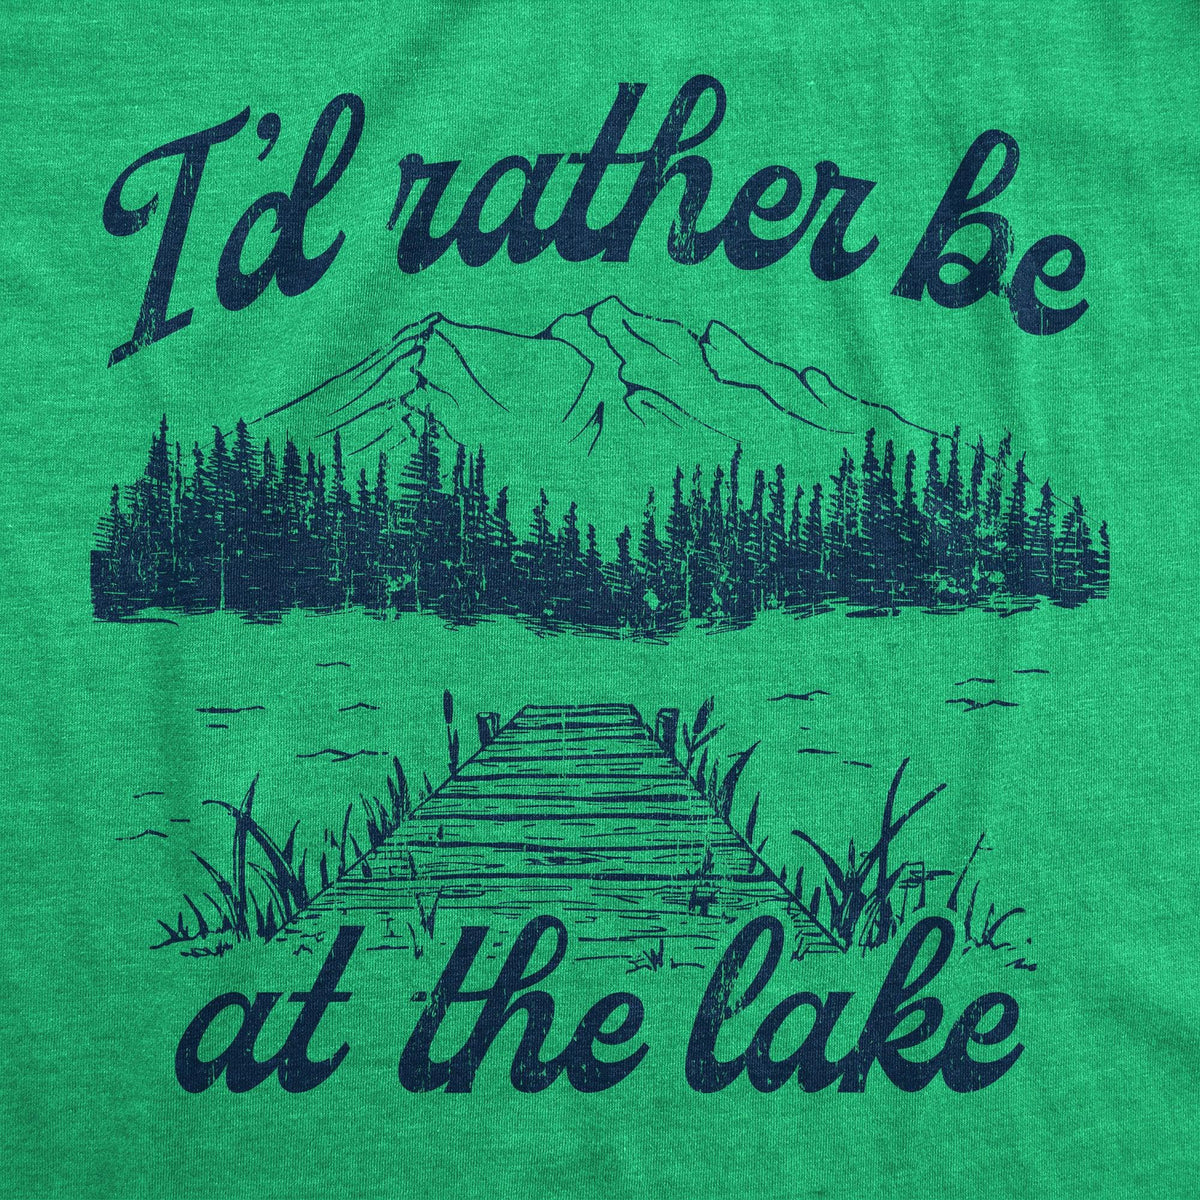 Id Rather Be At The Lake Men&#39;s Tshirt  -  Crazy Dog T-Shirts